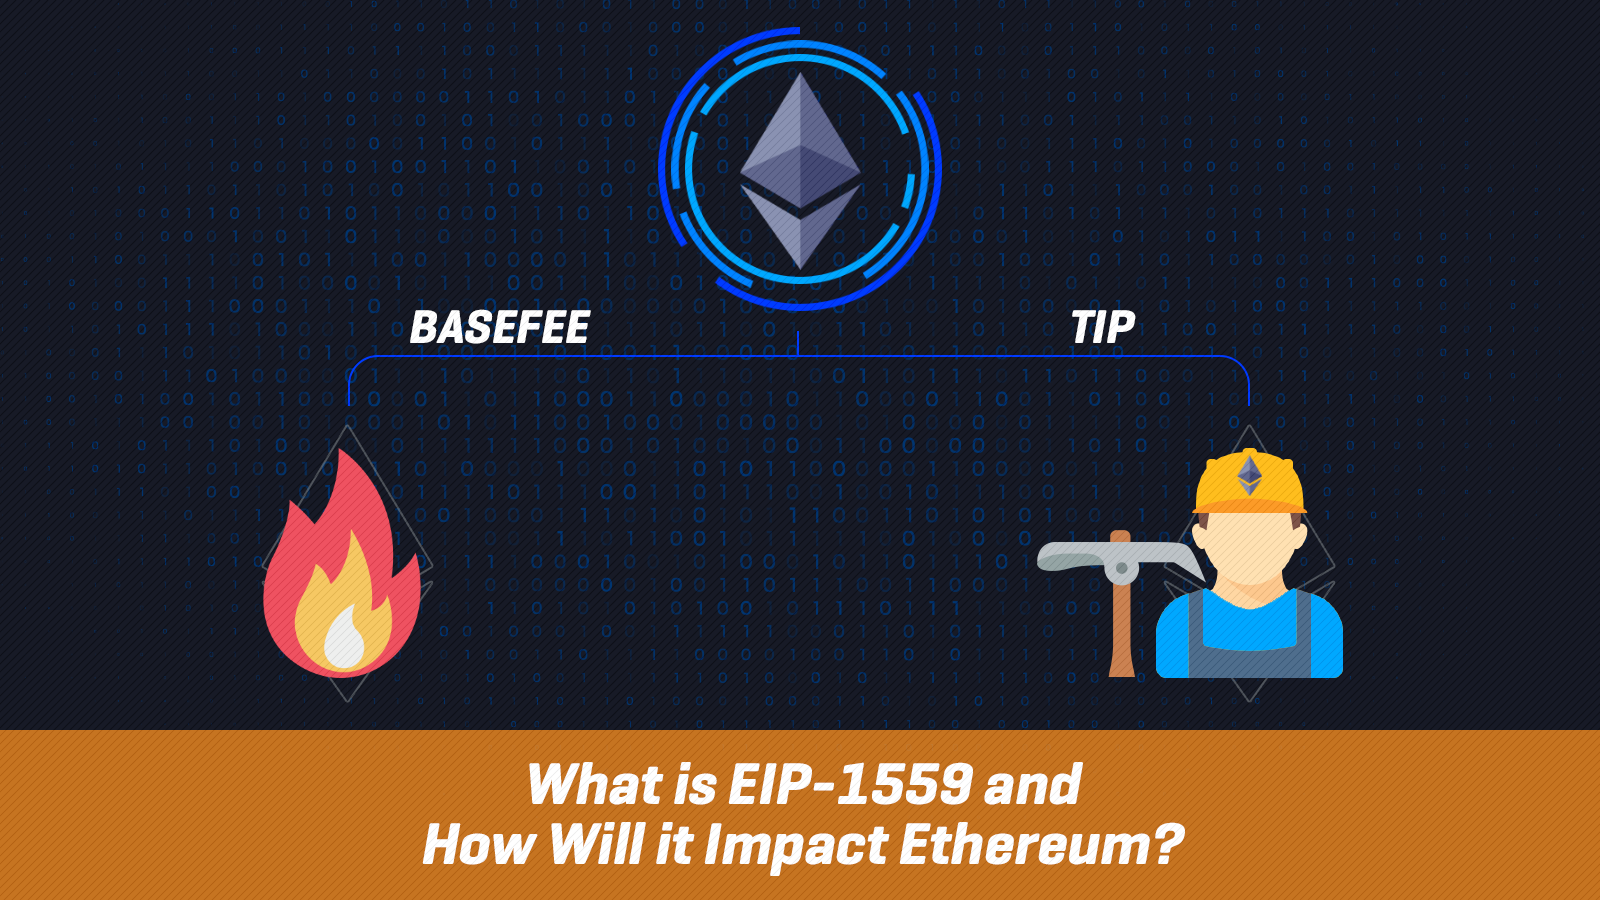 What is EIP-1559 and How Will it Impact Ethereum?